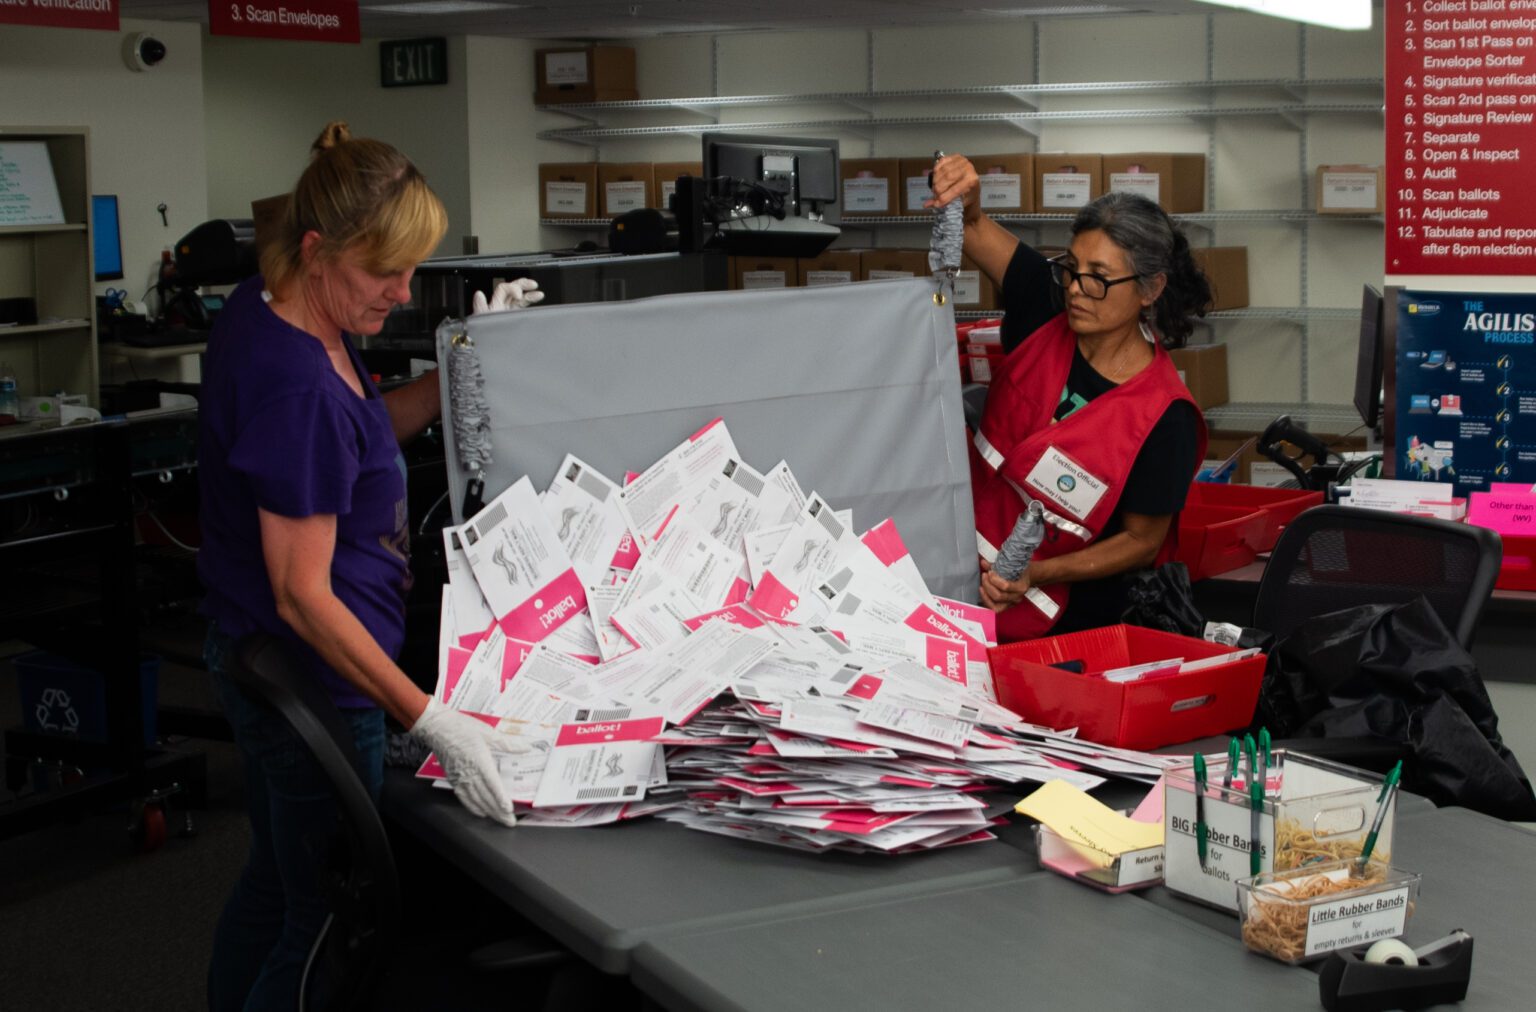 Election Supervisor Amy Grasher, left, and another election official dump a container full of ballots on the table.